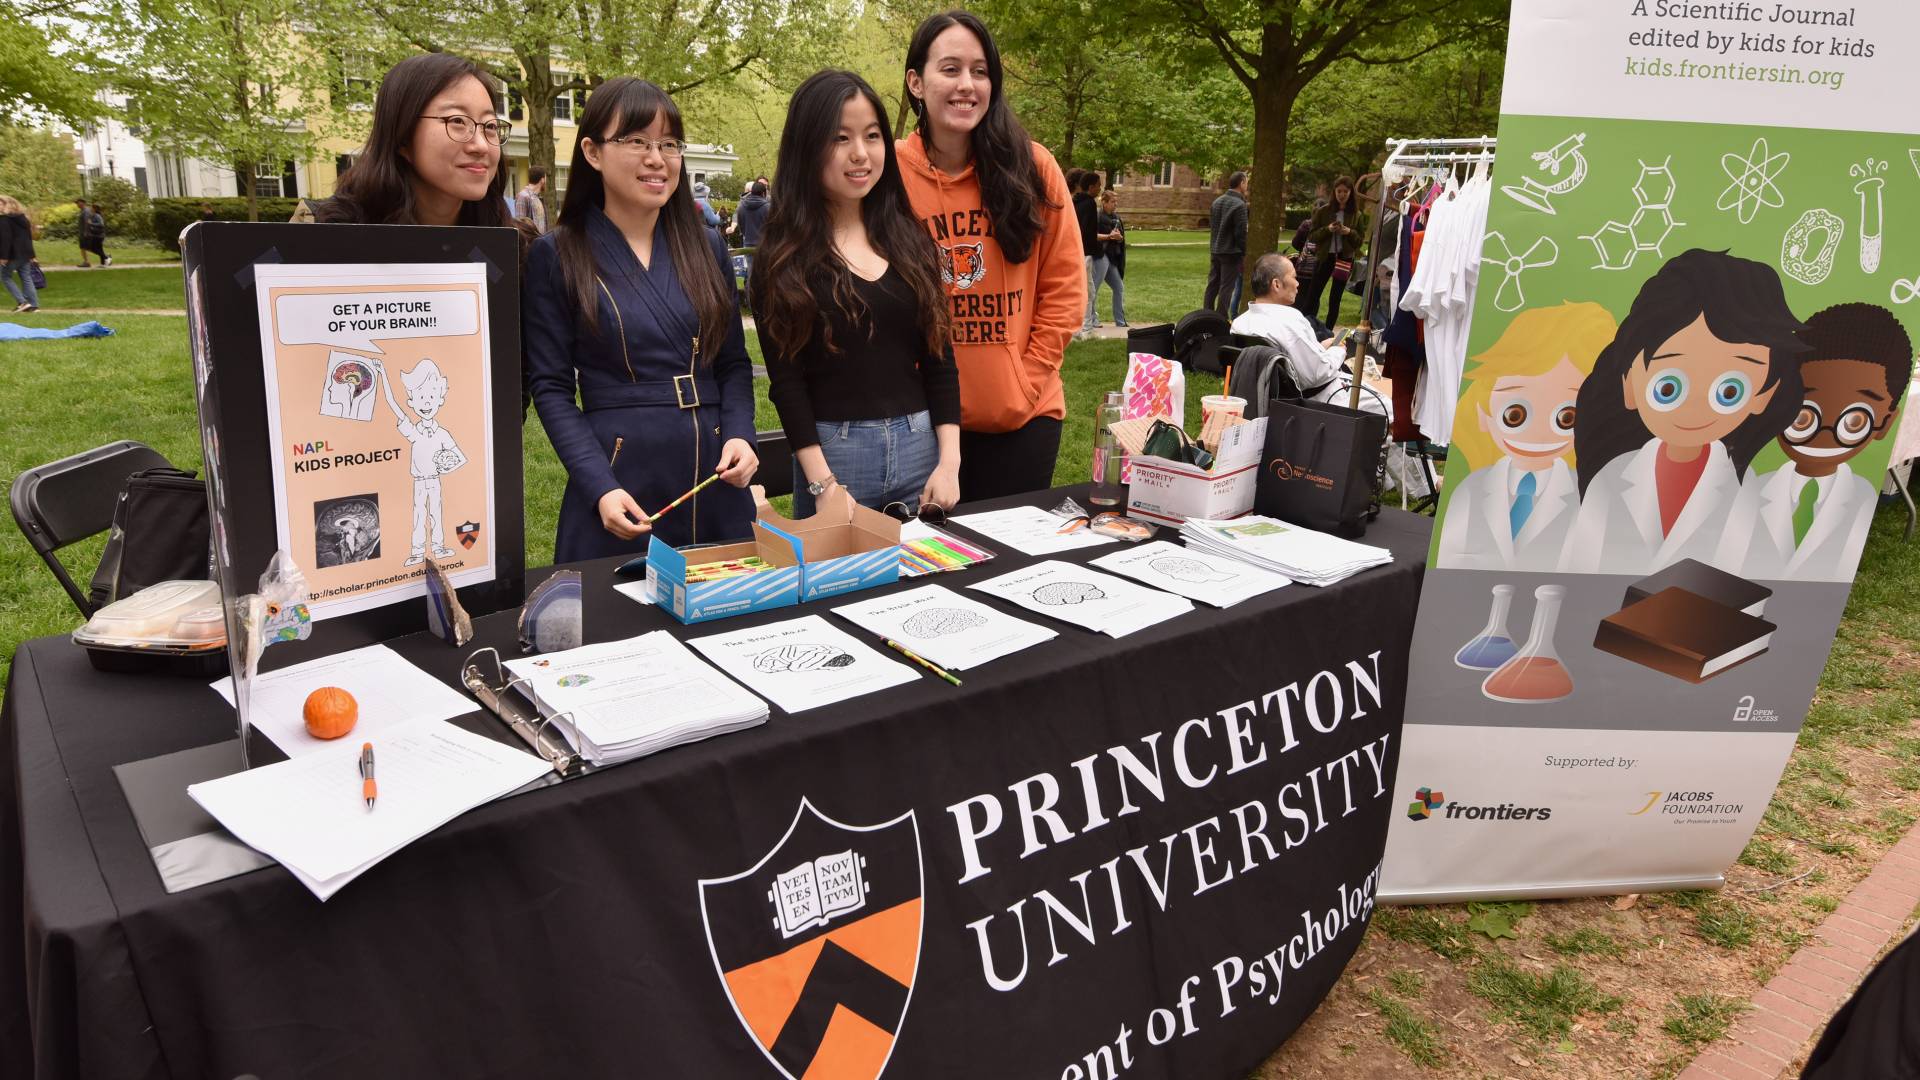 4 women behind a table promoting the activities of the department of psychology